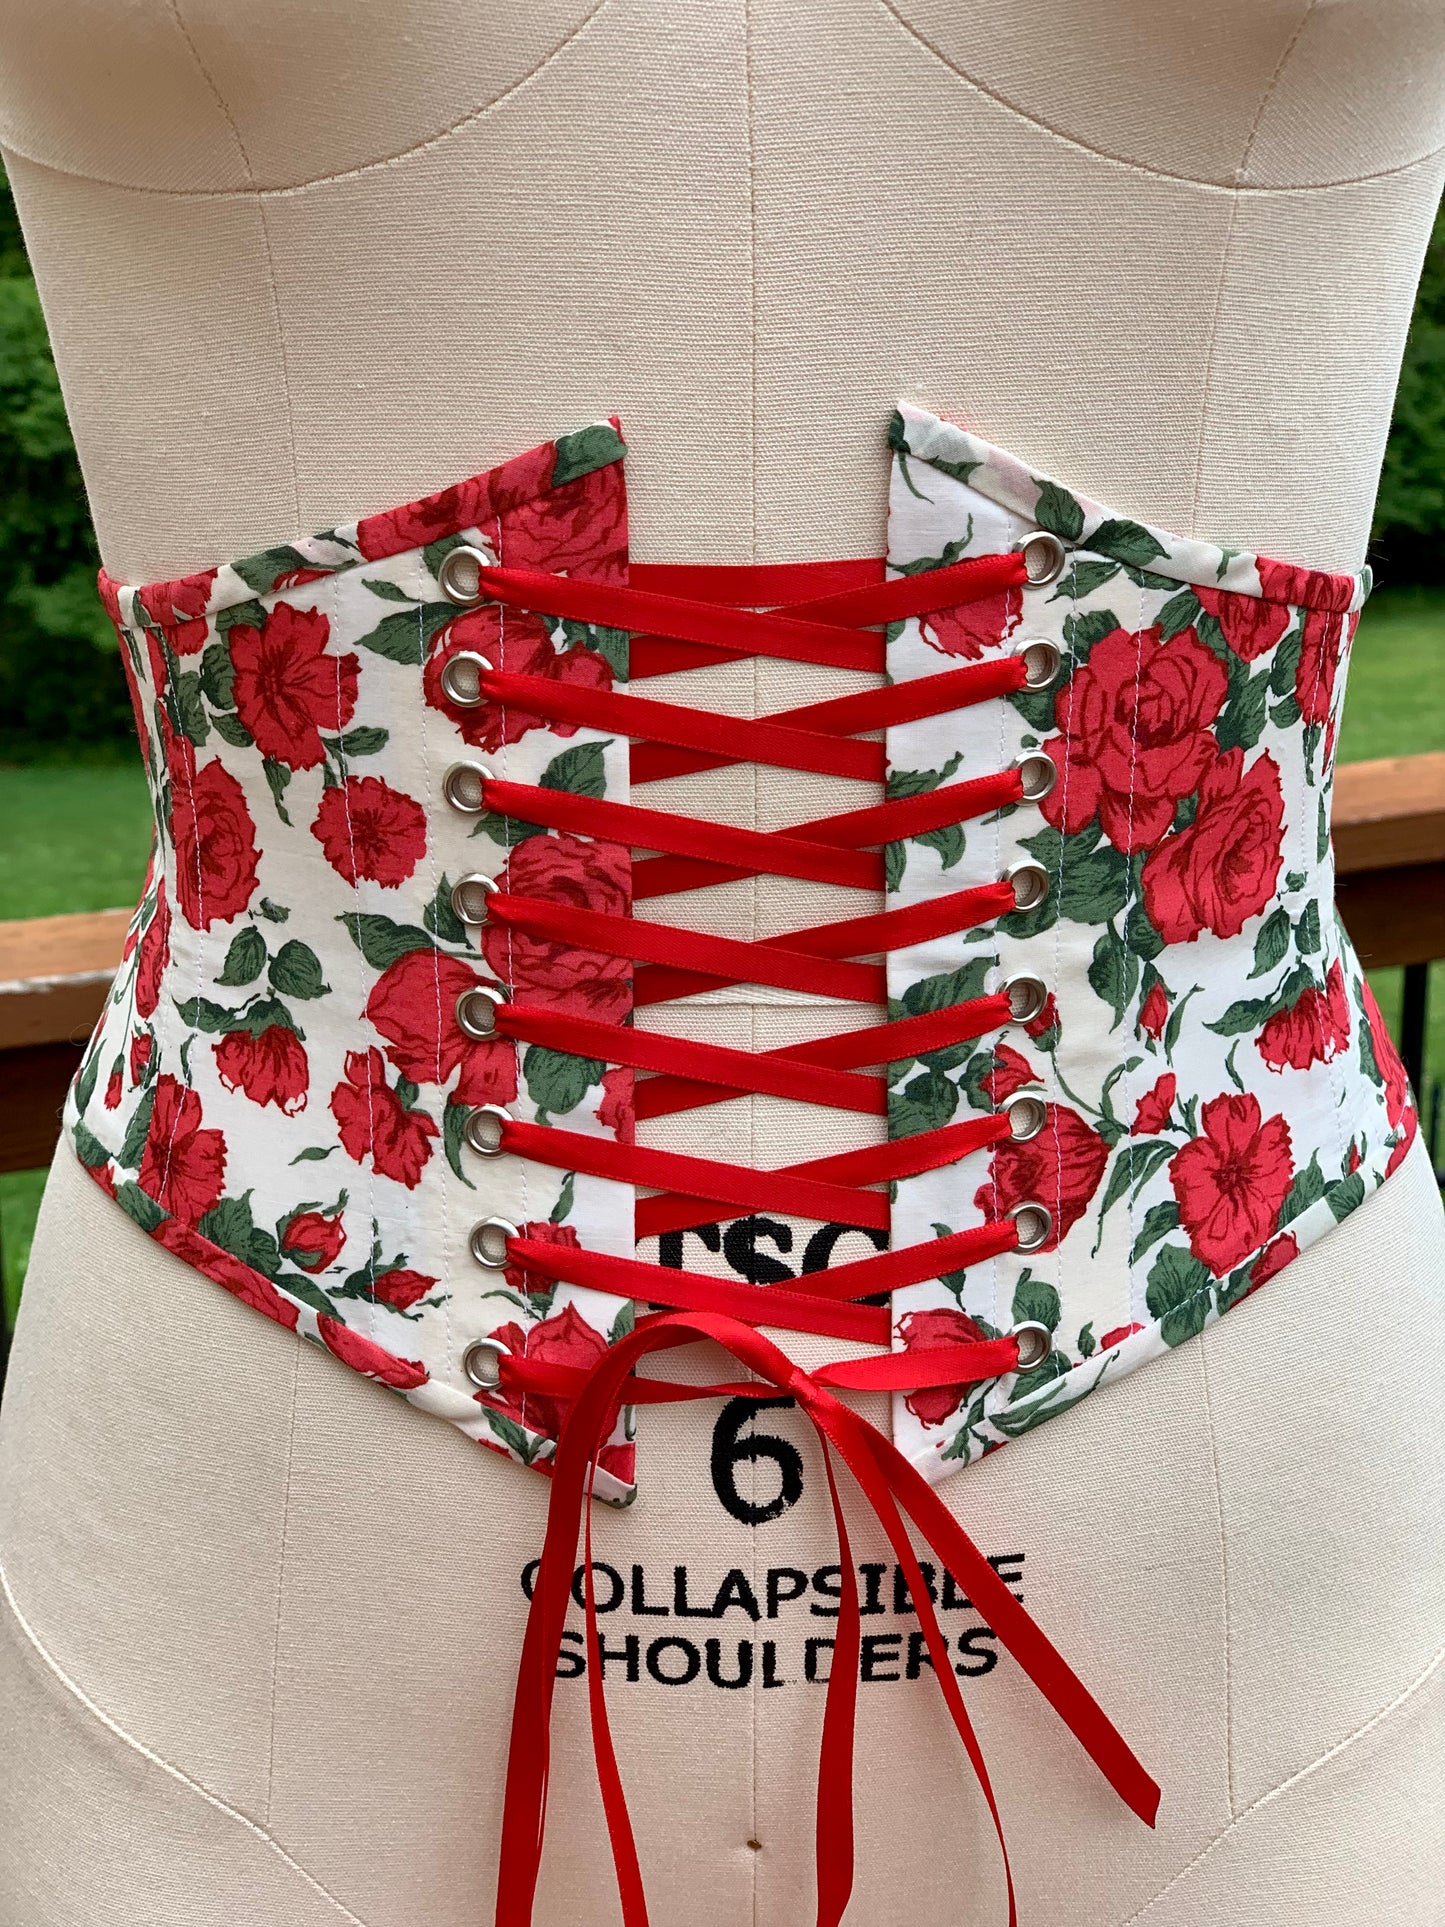 Vintage Roses Corset Waist Belt - Available in 12 different sizes